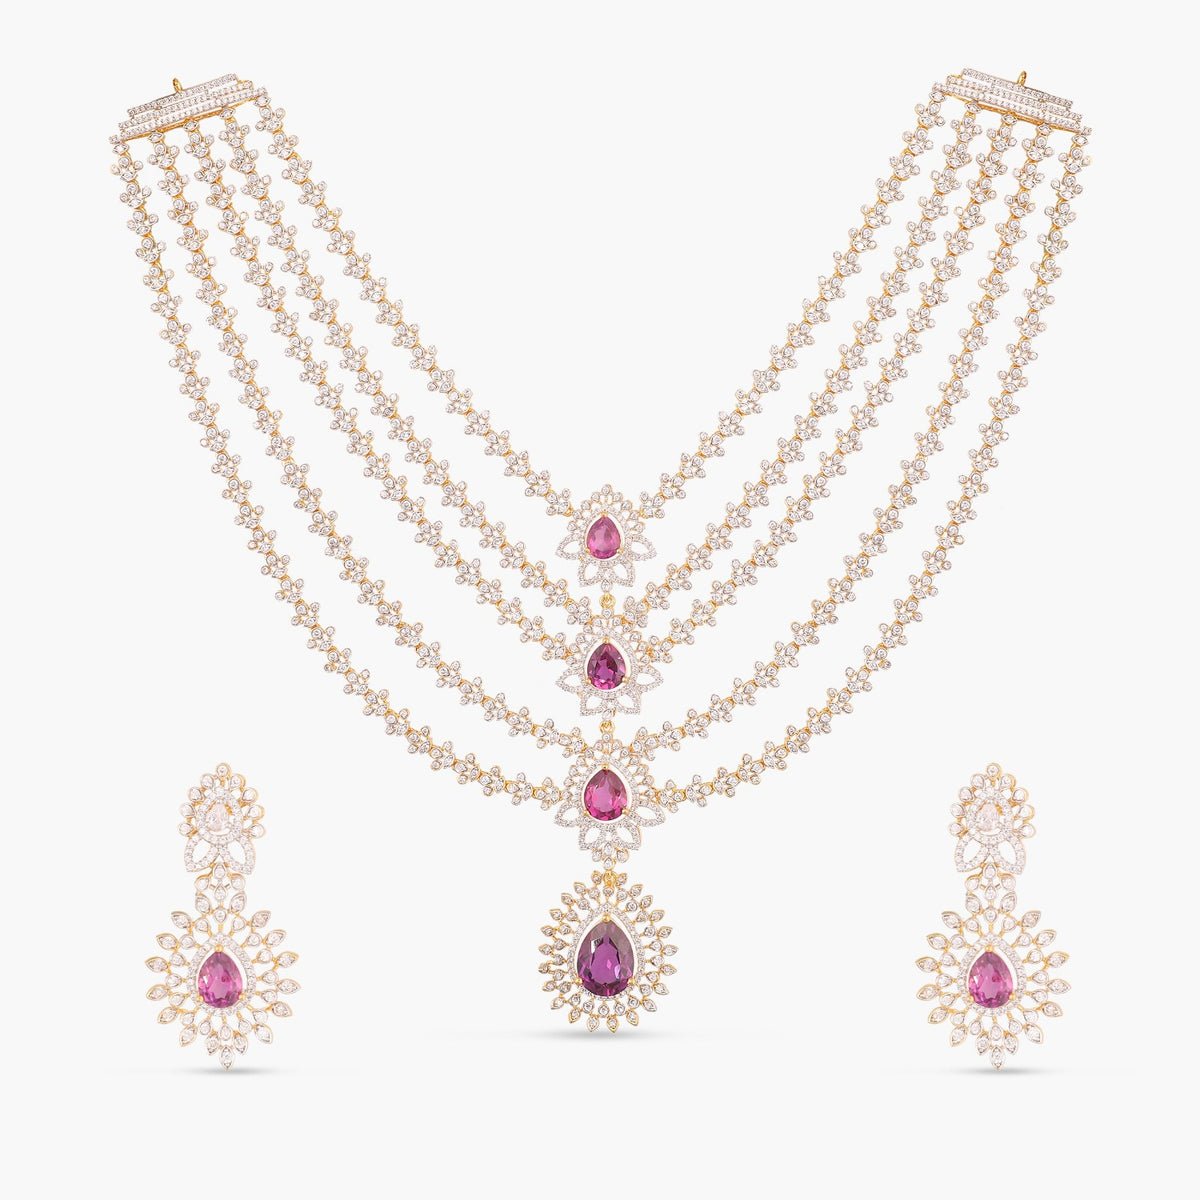 Pink and White American Diamond Necklace Set with A Pair of Bangles